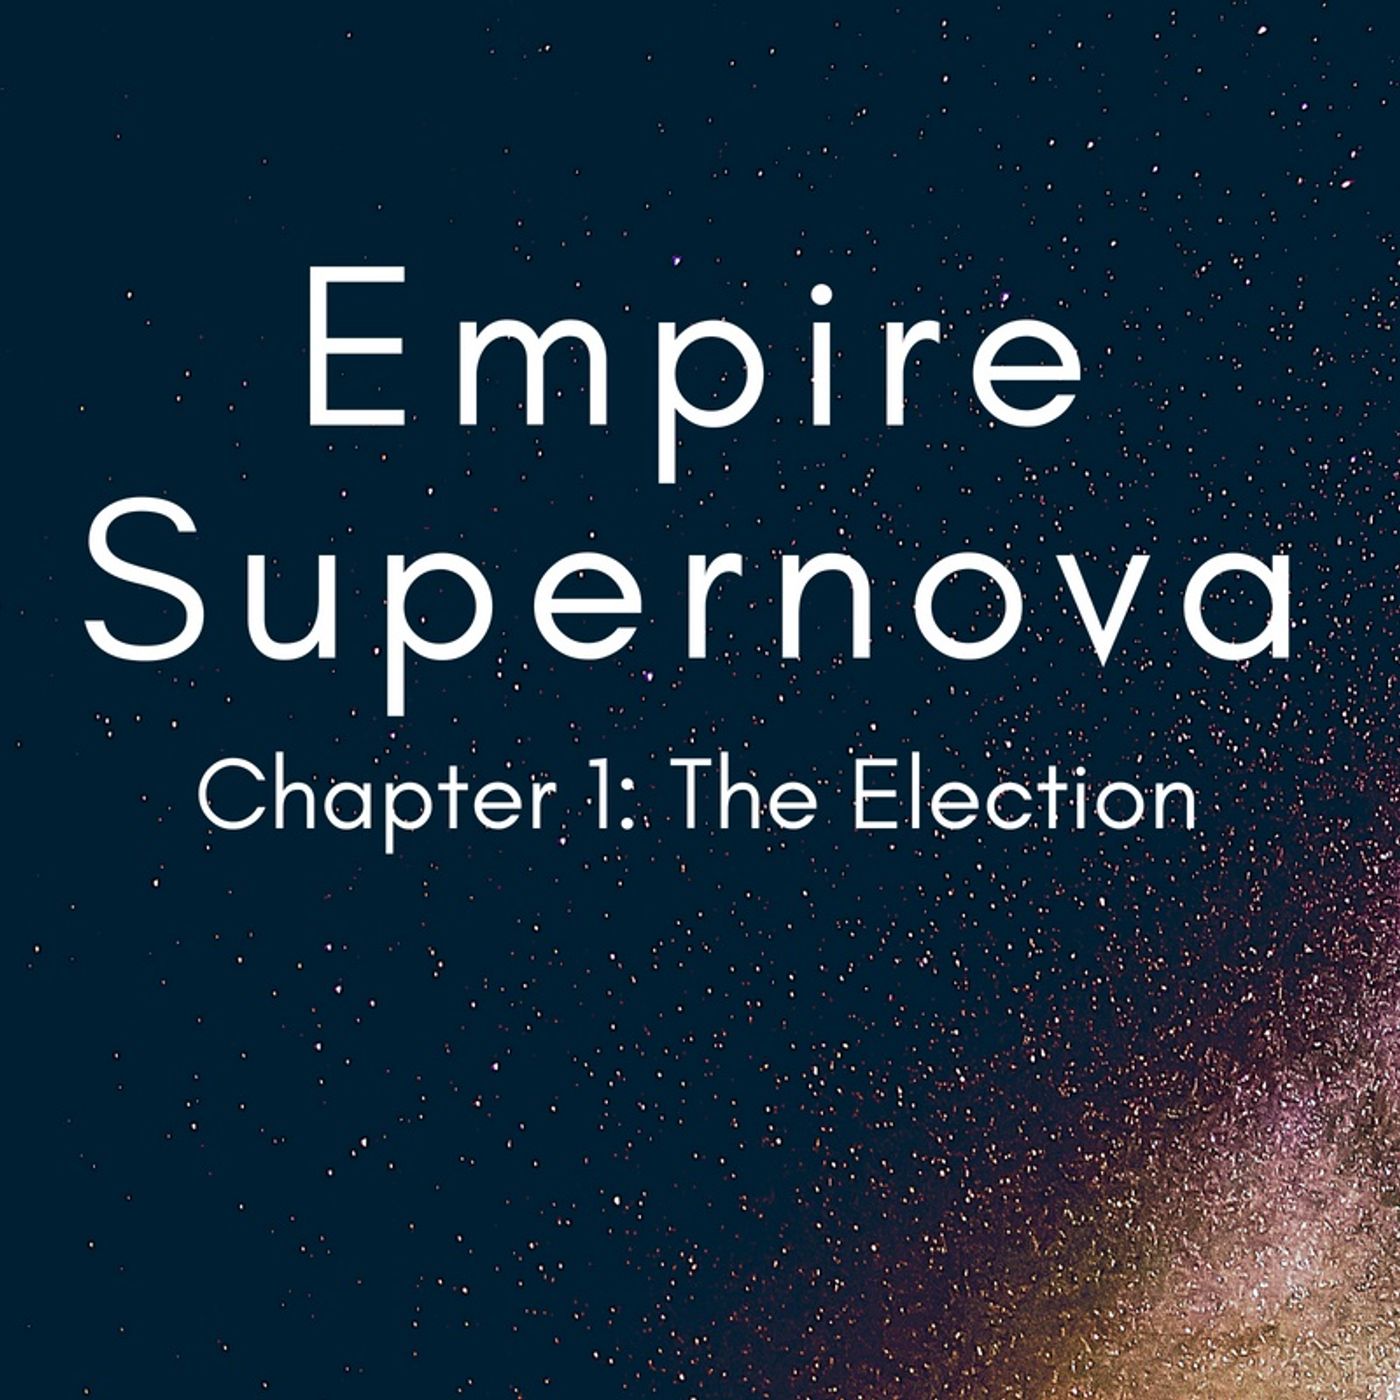 Chapter 1 - The Election